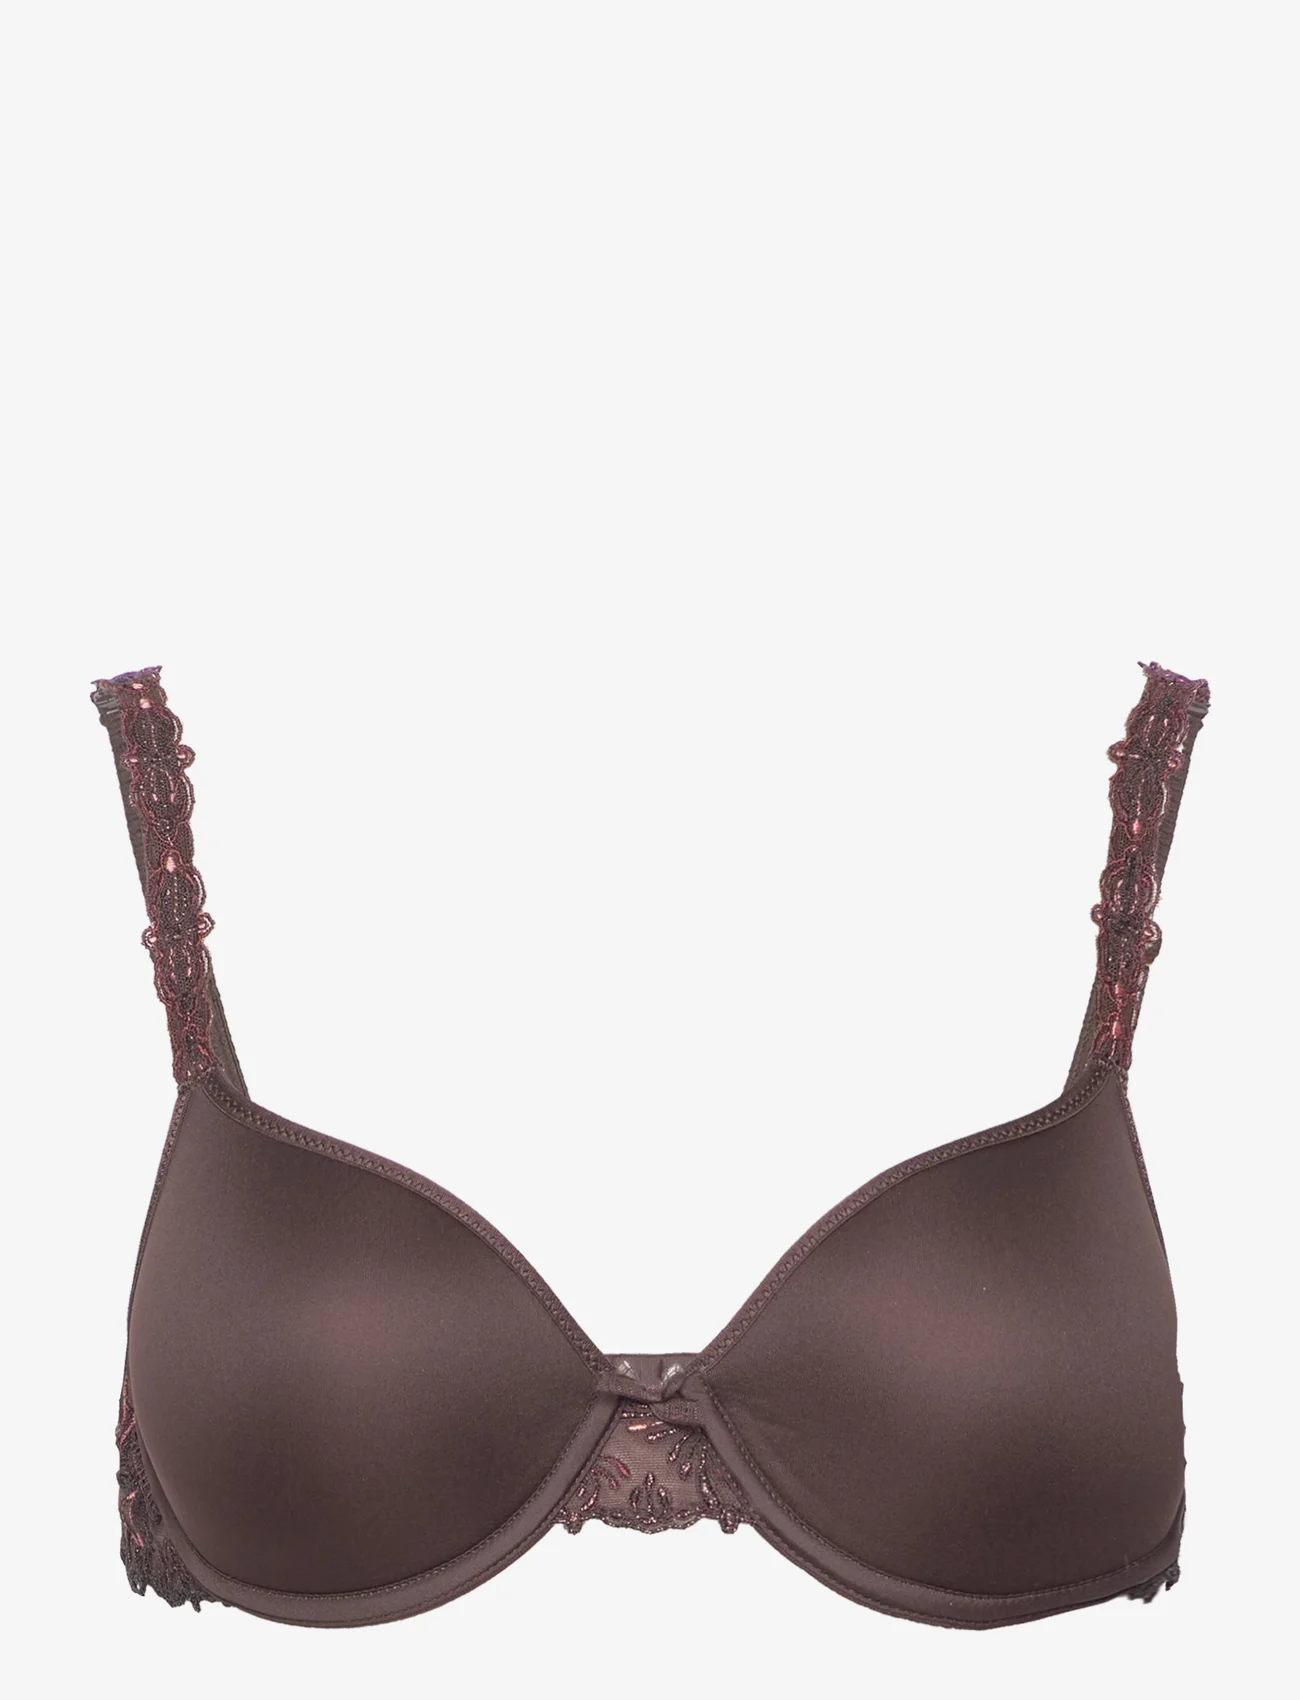 CHANTELLE - Champs Elysees Covering Memory Bra - t-shirt bras - glossy brown - 0